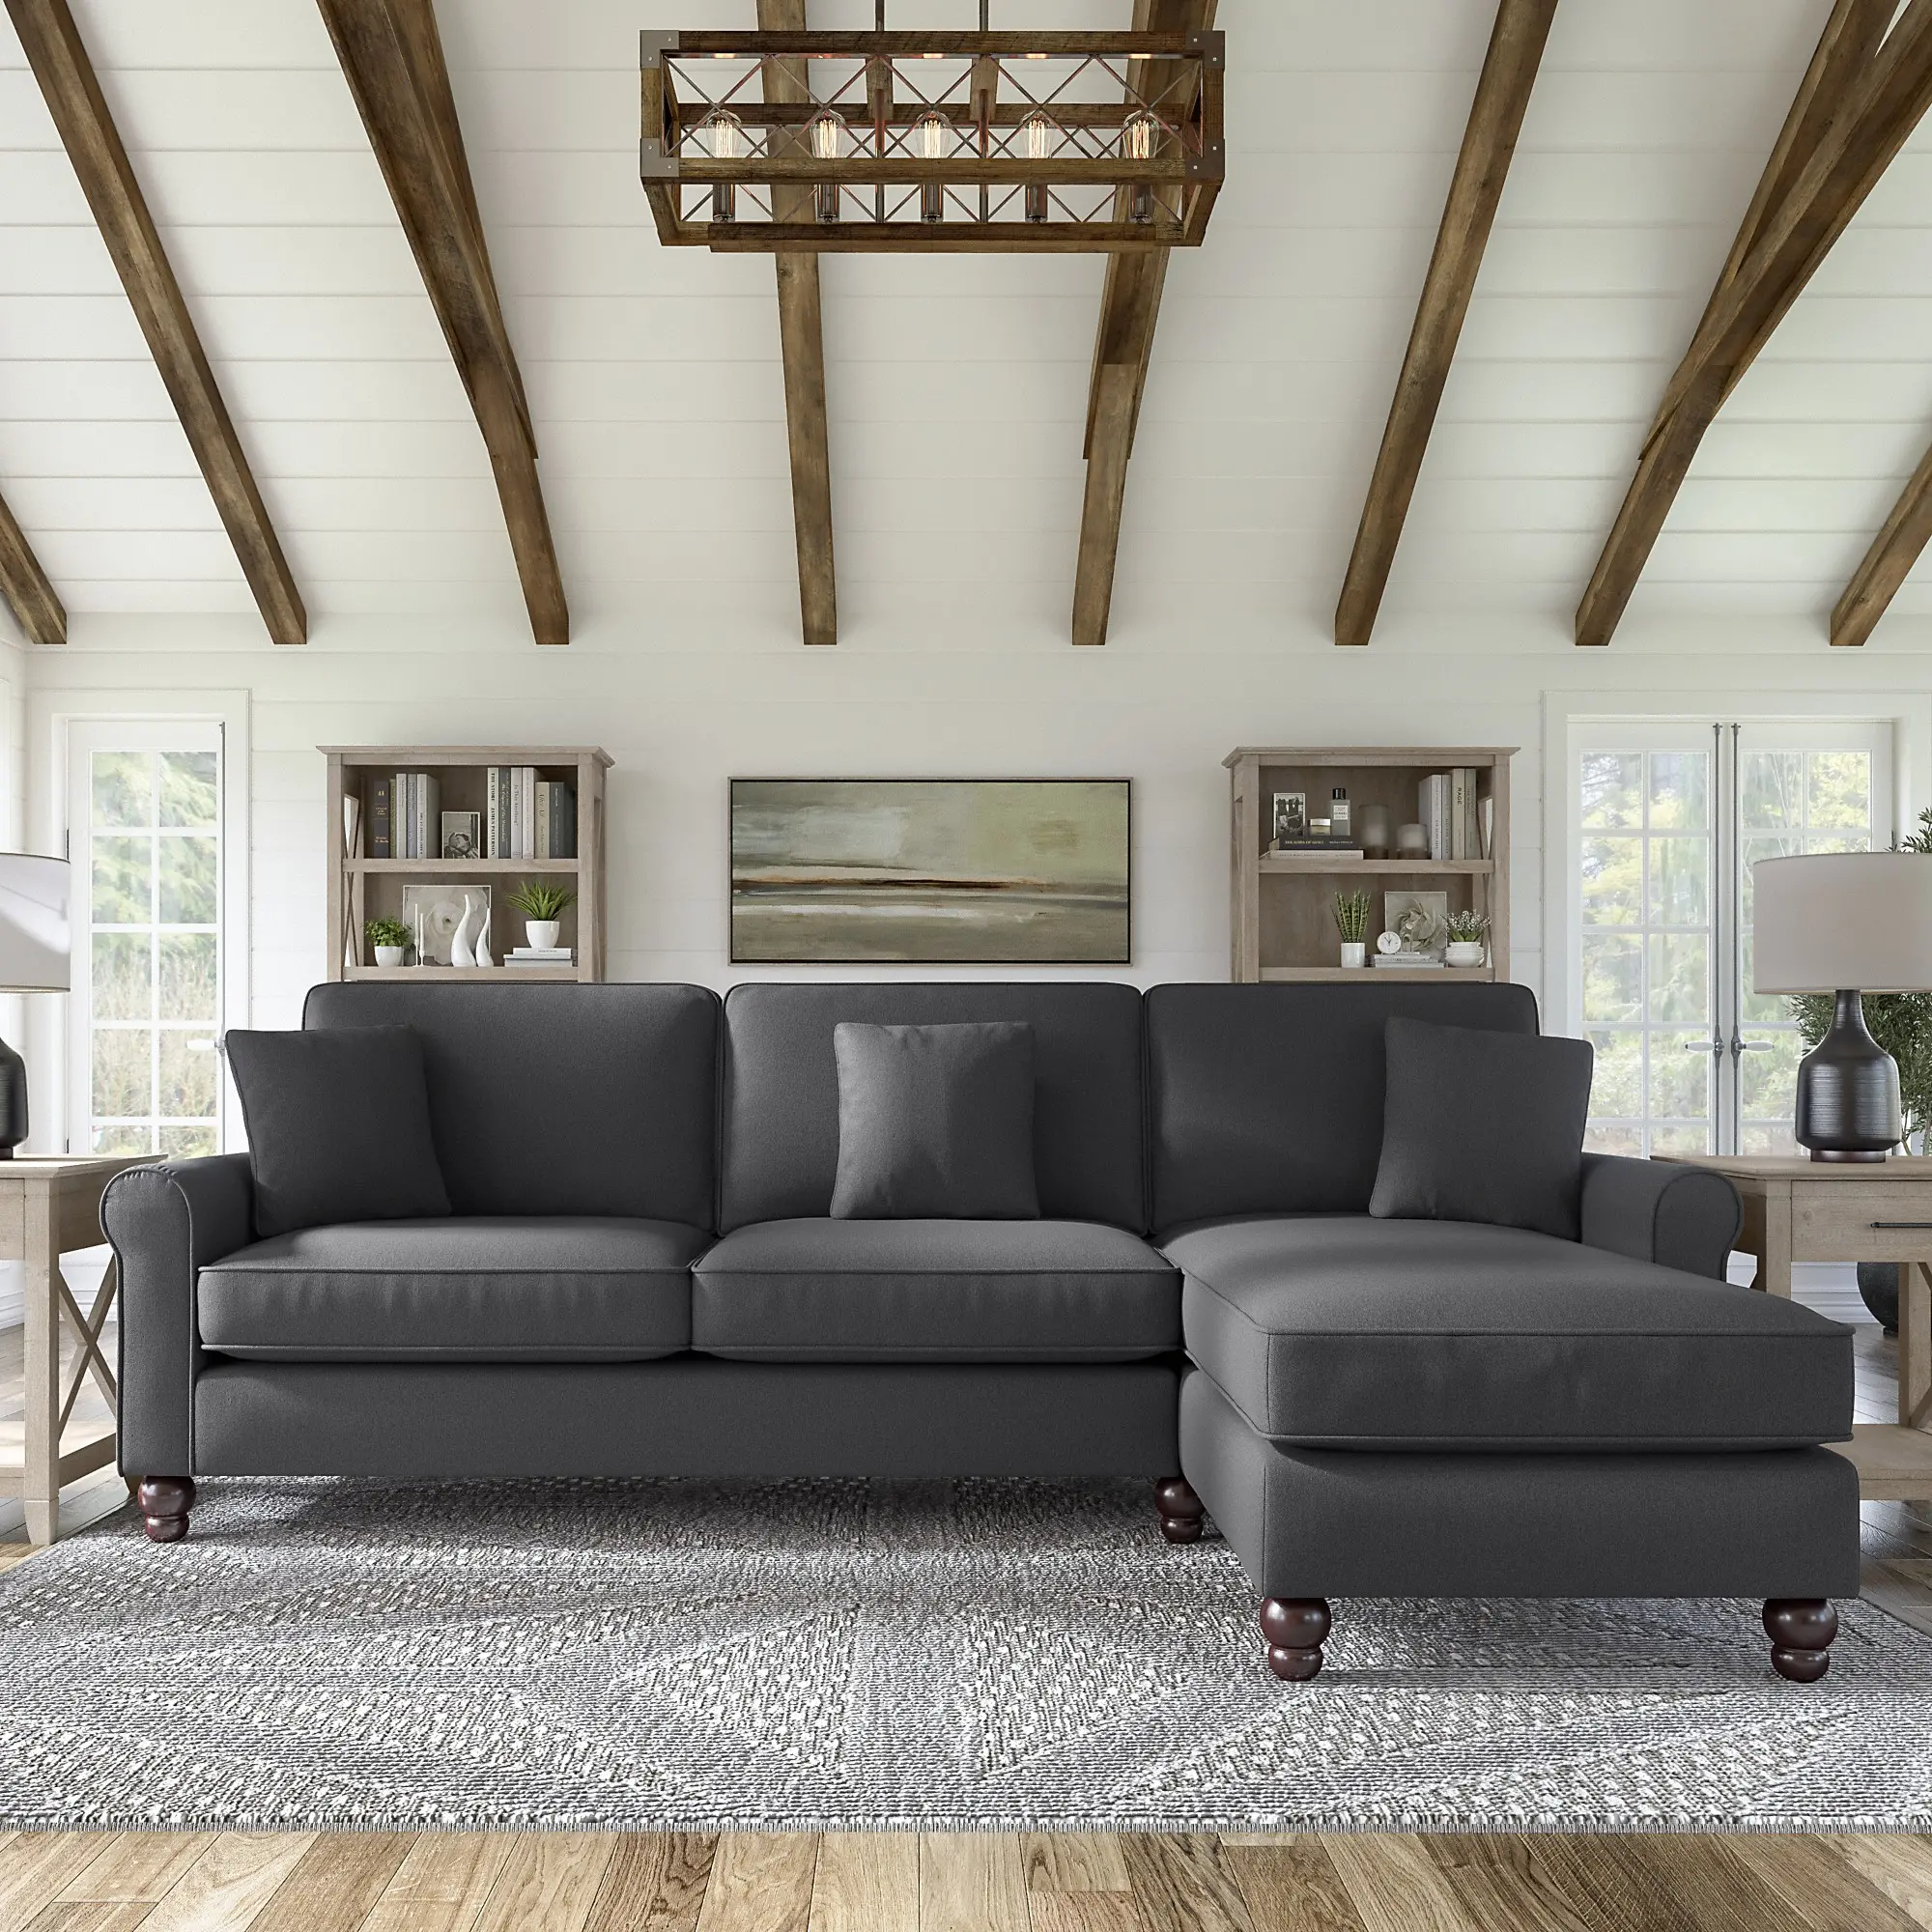 HDY102BCGH-03K Hudson Charcoal Gray Sectional with Reversible Cha sku HDY102BCGH-03K